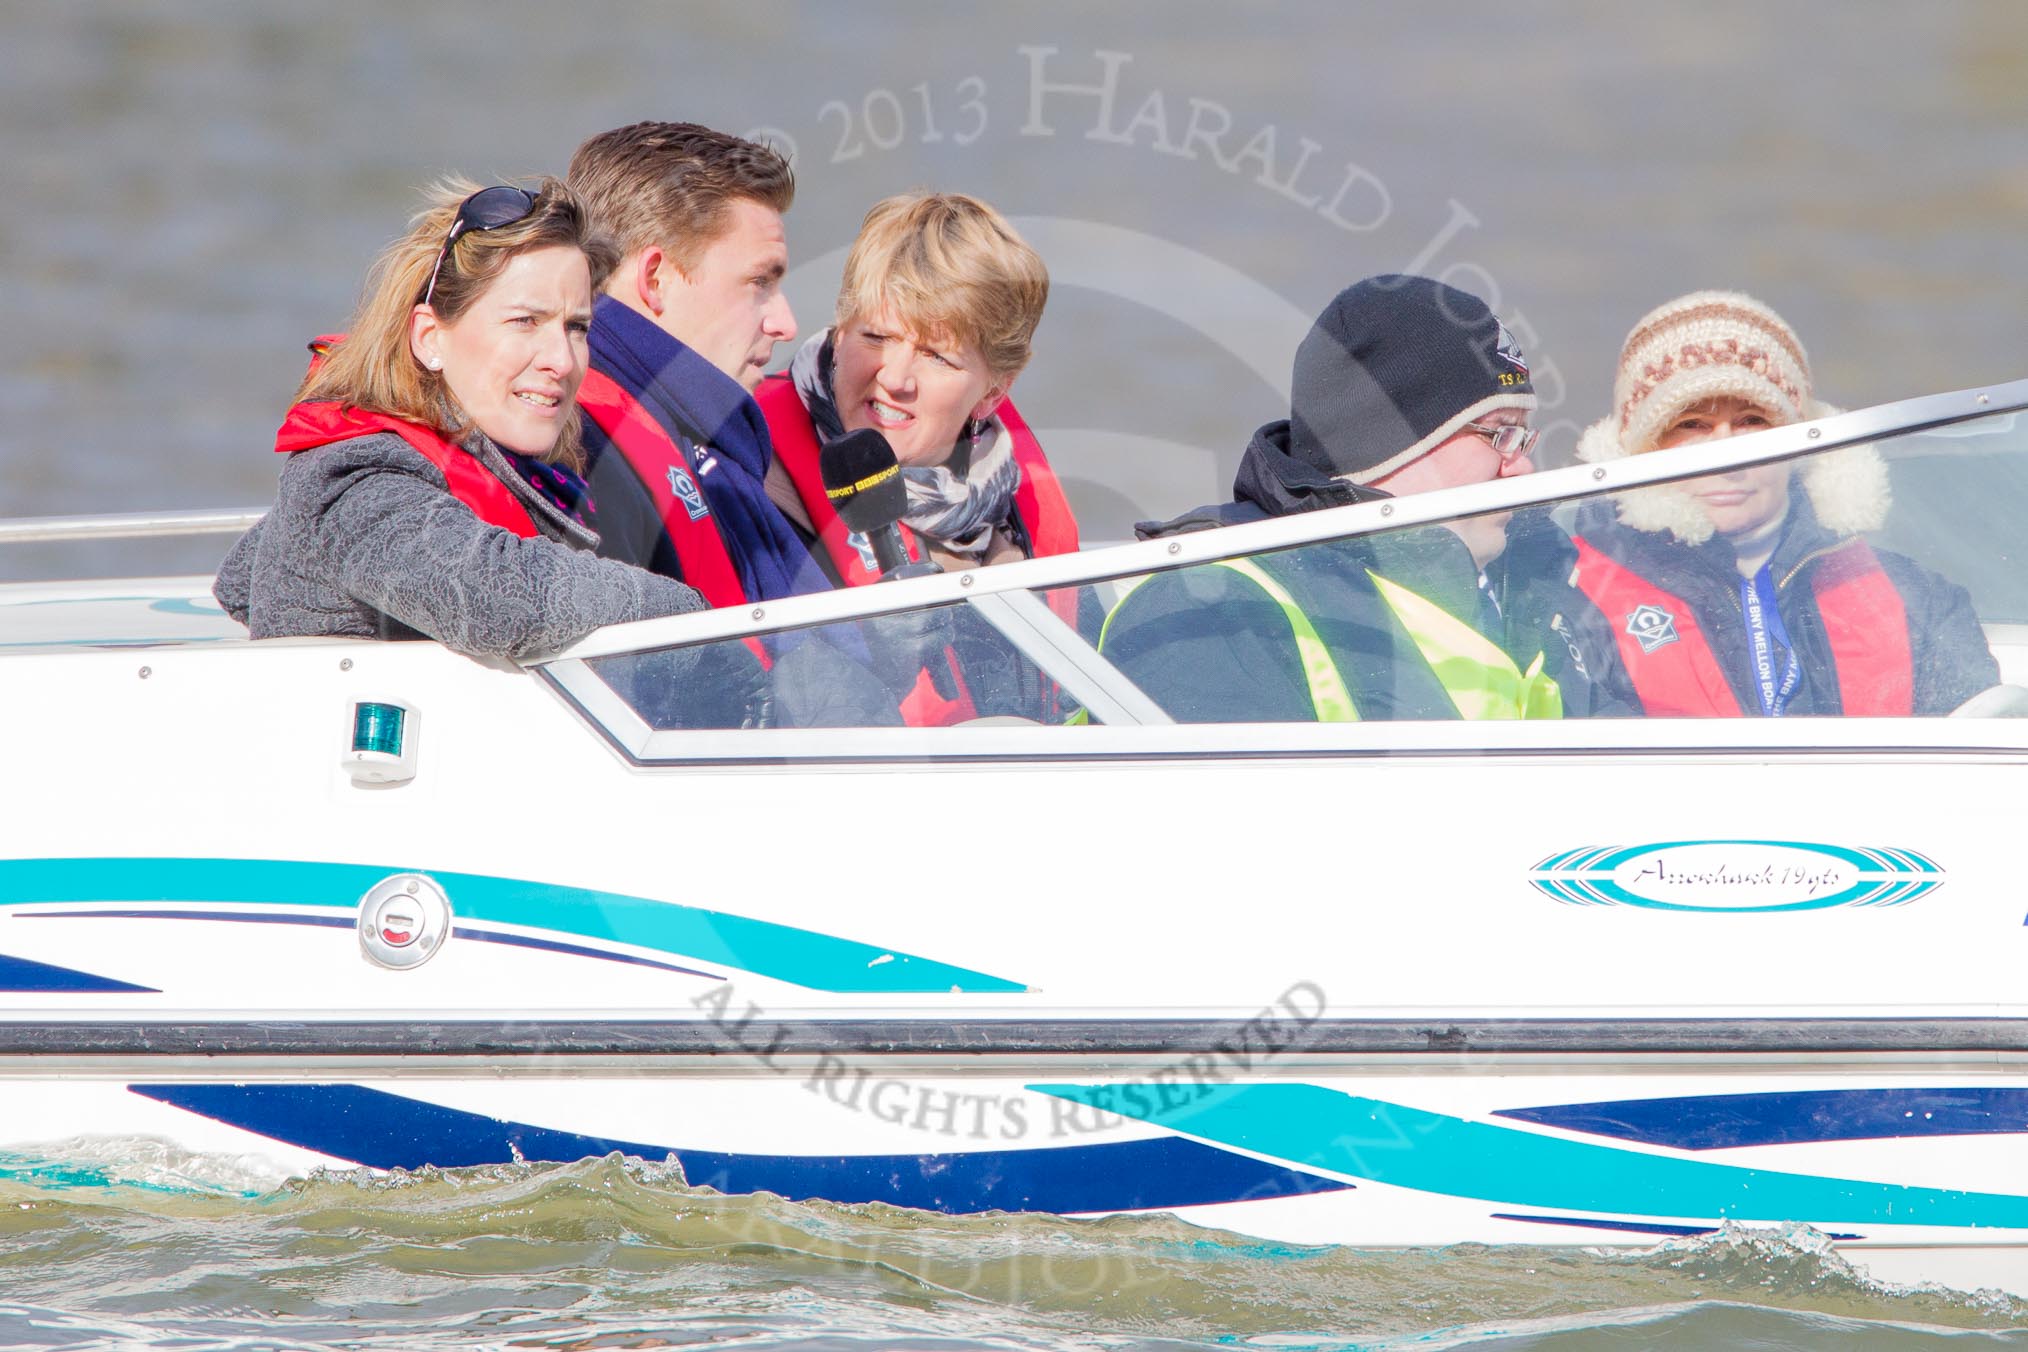 The Boat Race 2013.
Putney,
London SW15,

United Kingdom,
on 31 March 2013 at 16:18, image #237